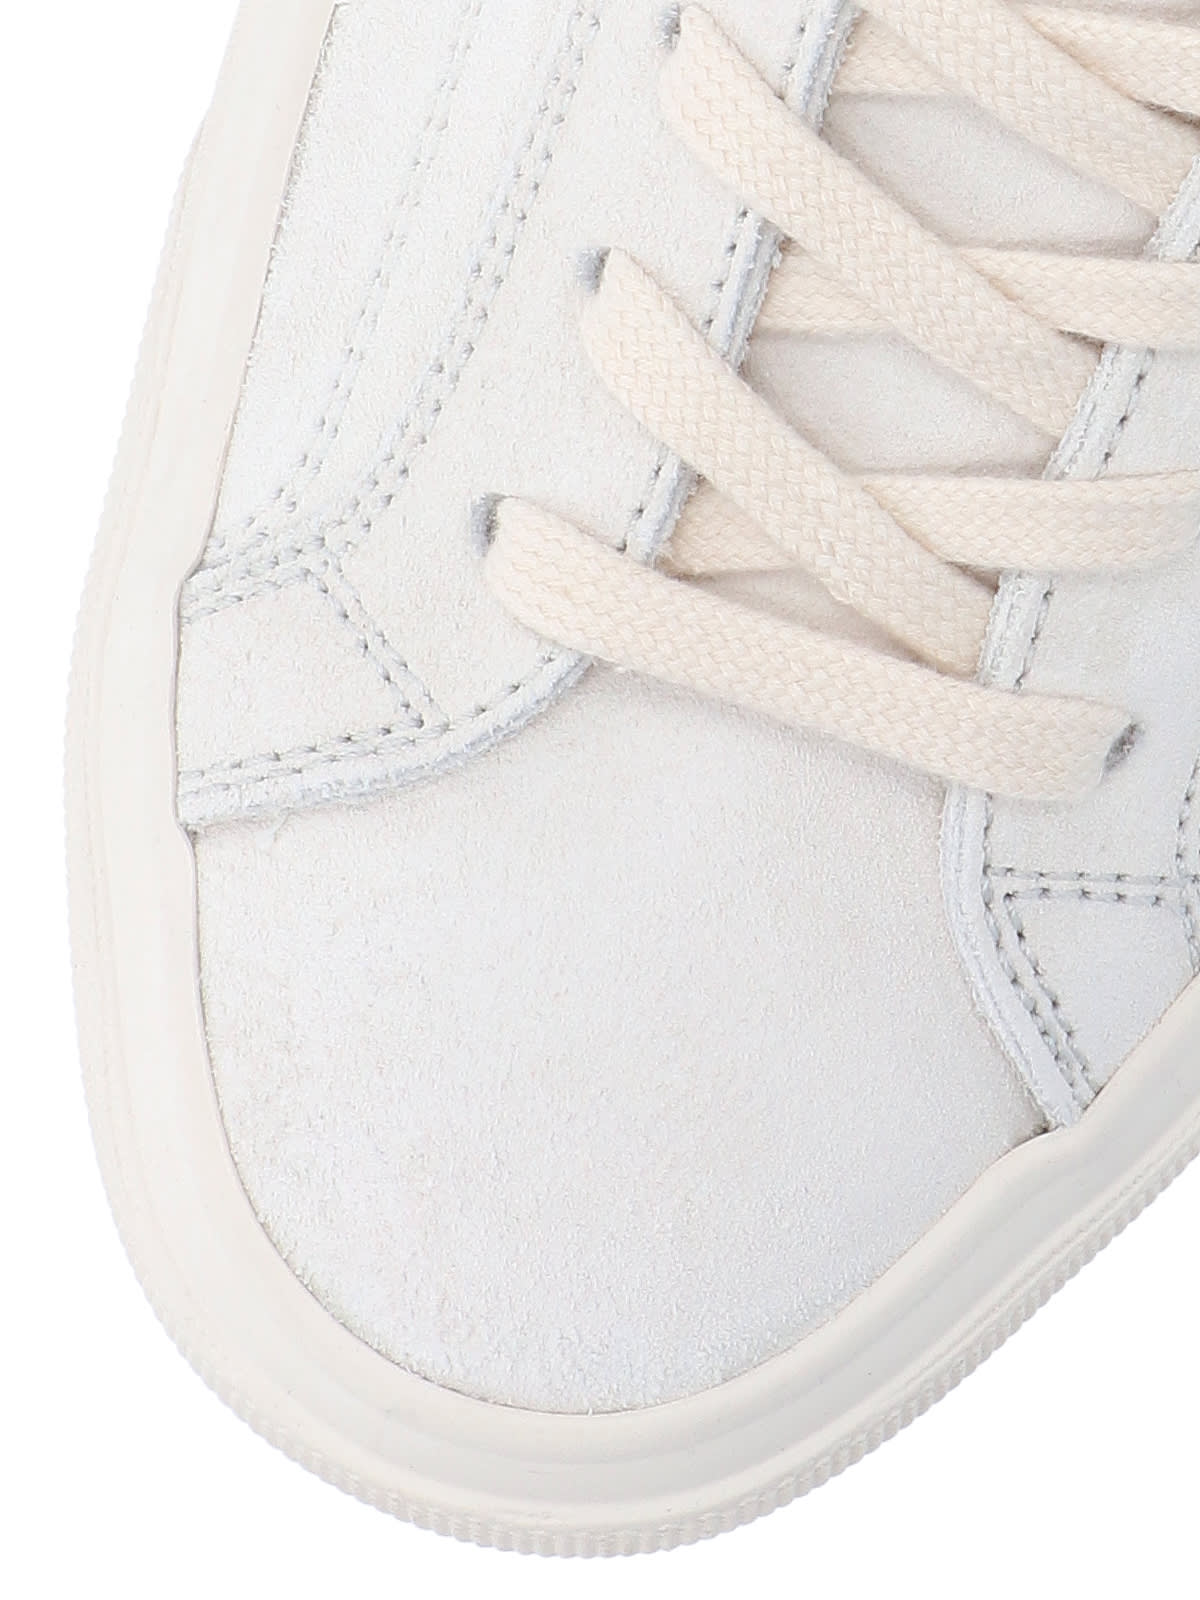 Shop Tom Ford Cambdridge Sneakers In White